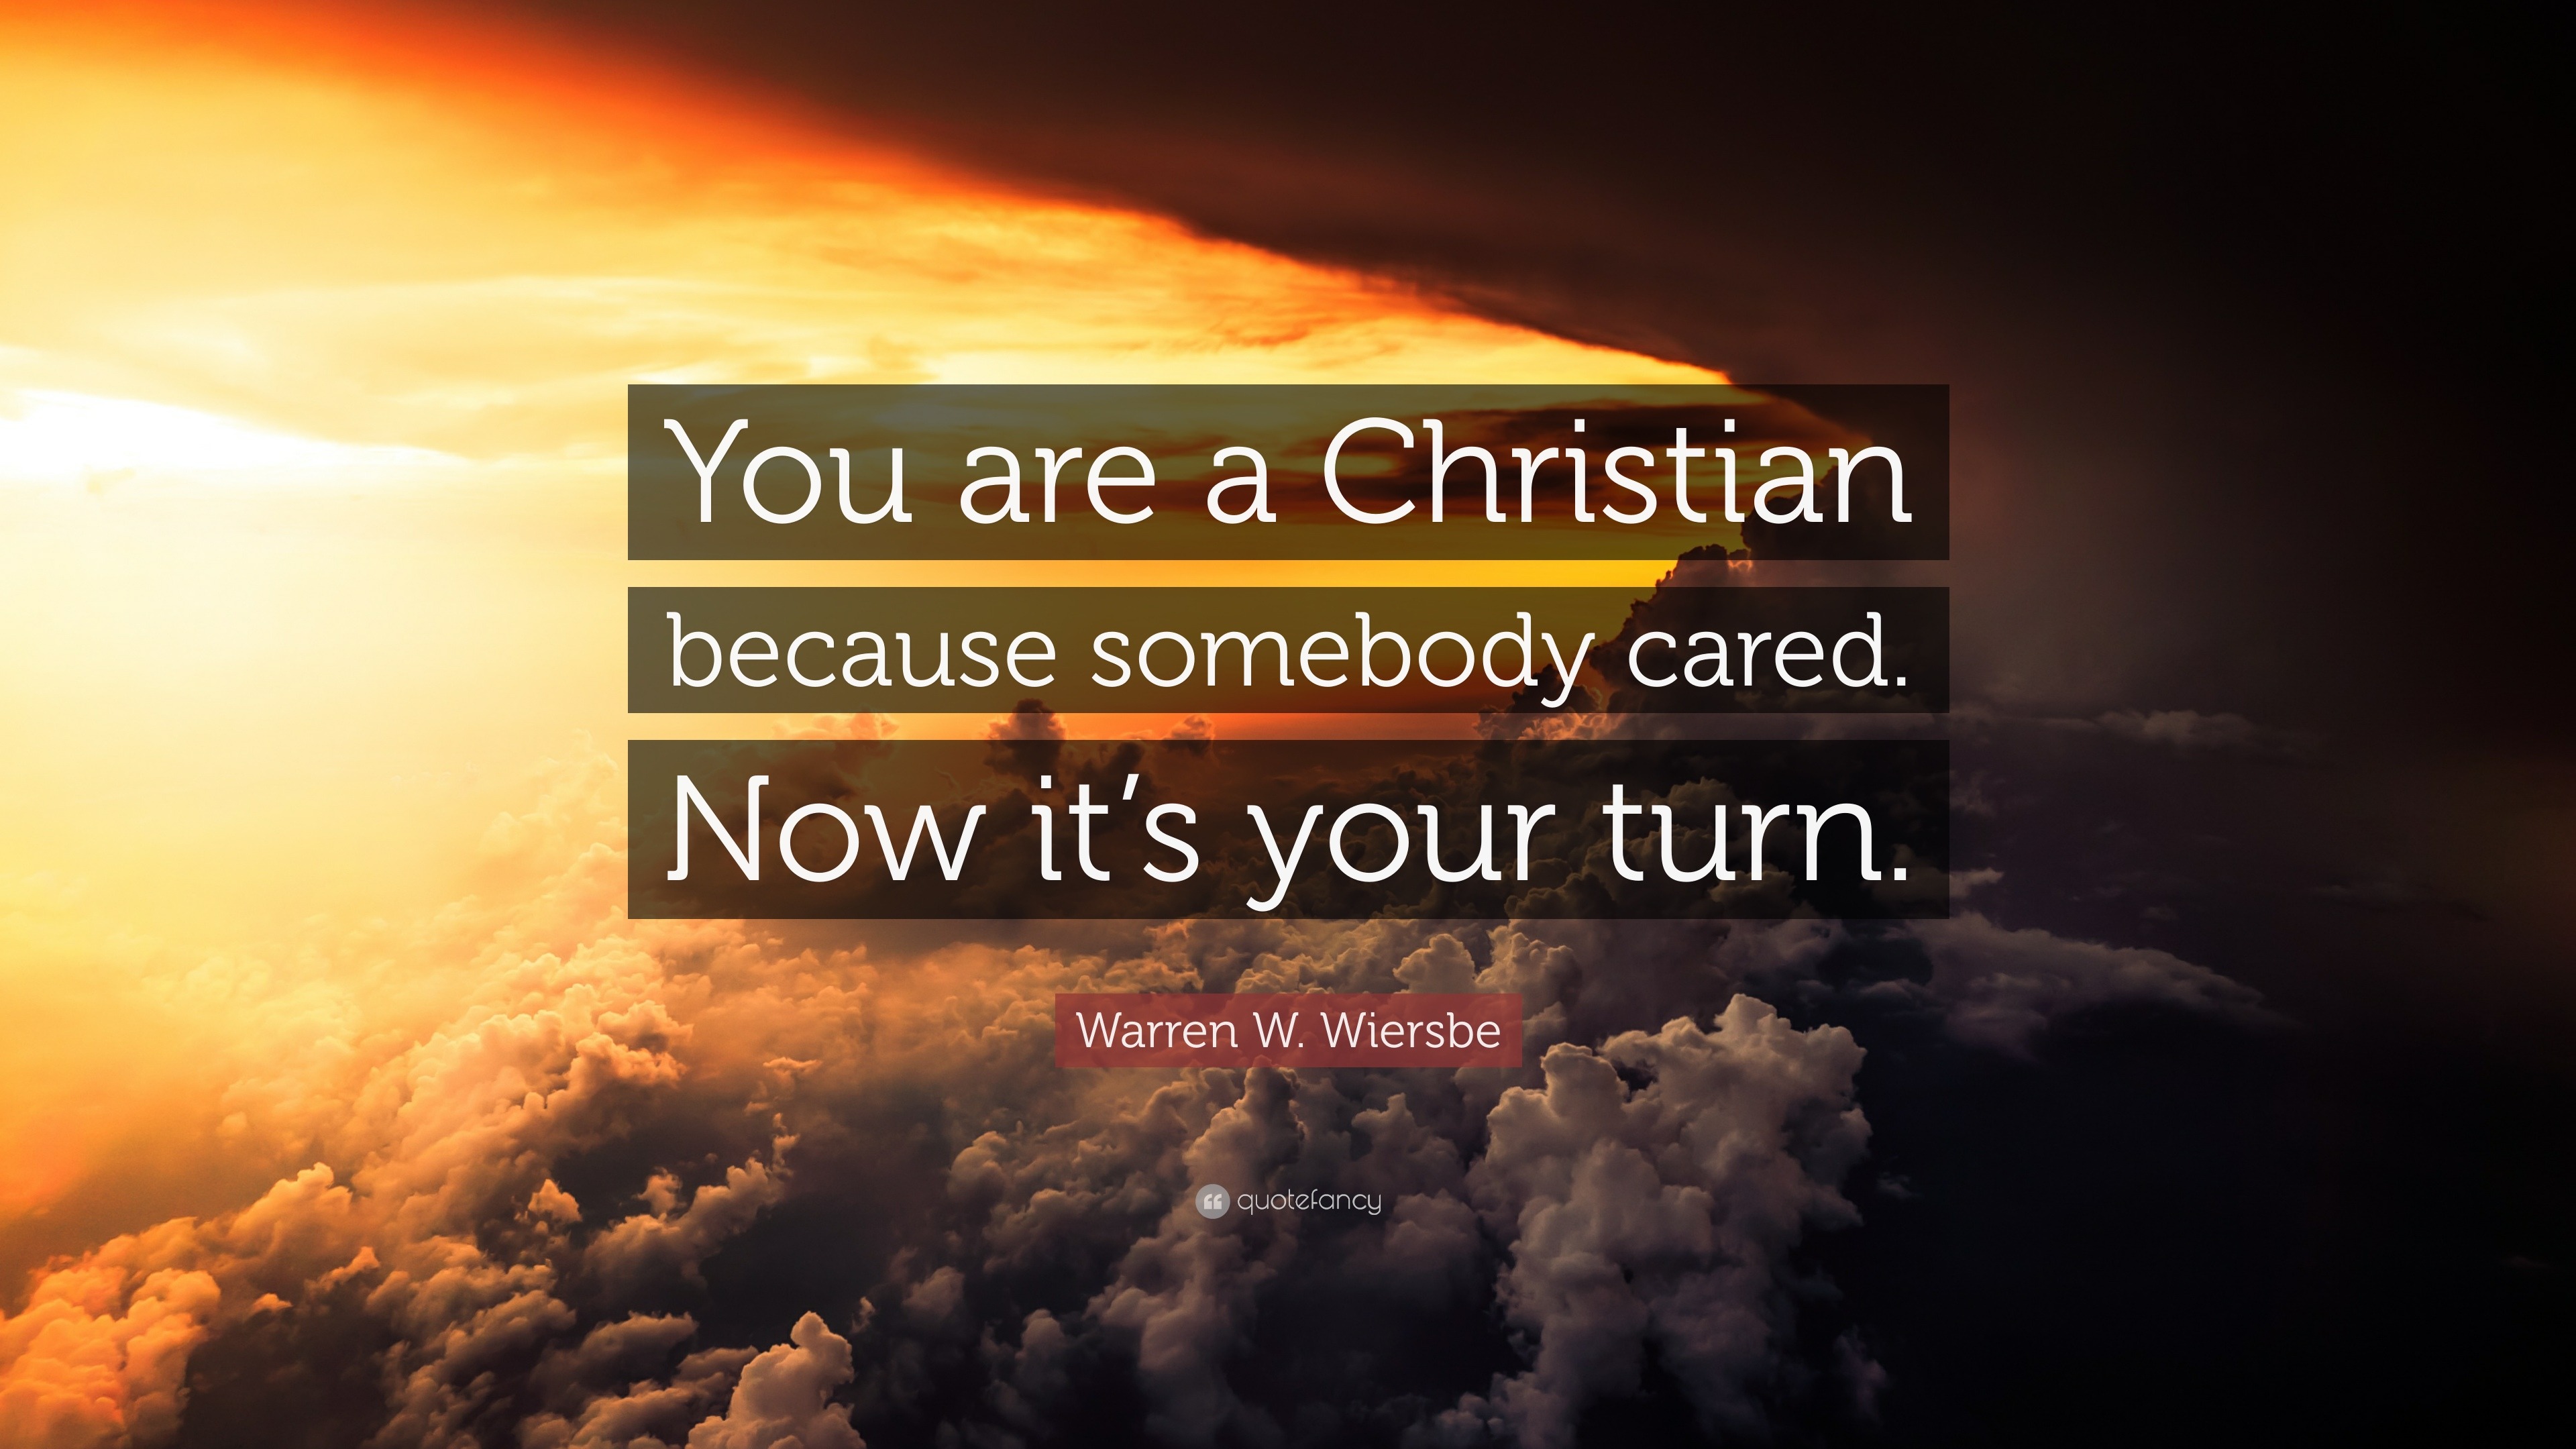 Warren W Wiersbe Quote You Are A Christian Because Somebody Cared Now It S Your Turn 10 Wallpapers Quotefancy